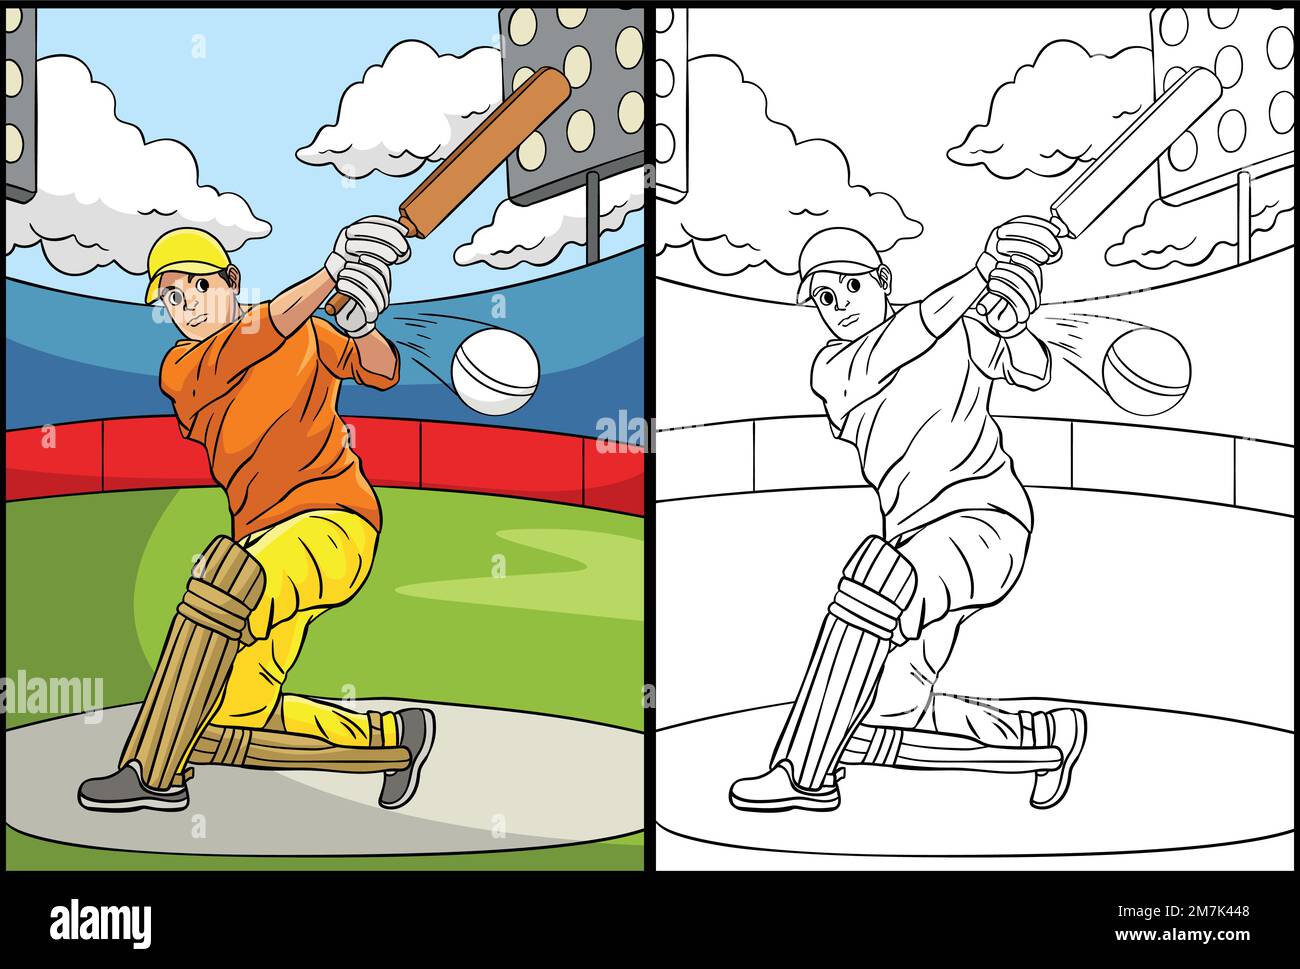 Cricket Coloring Page Colored Illustration Stock Vector